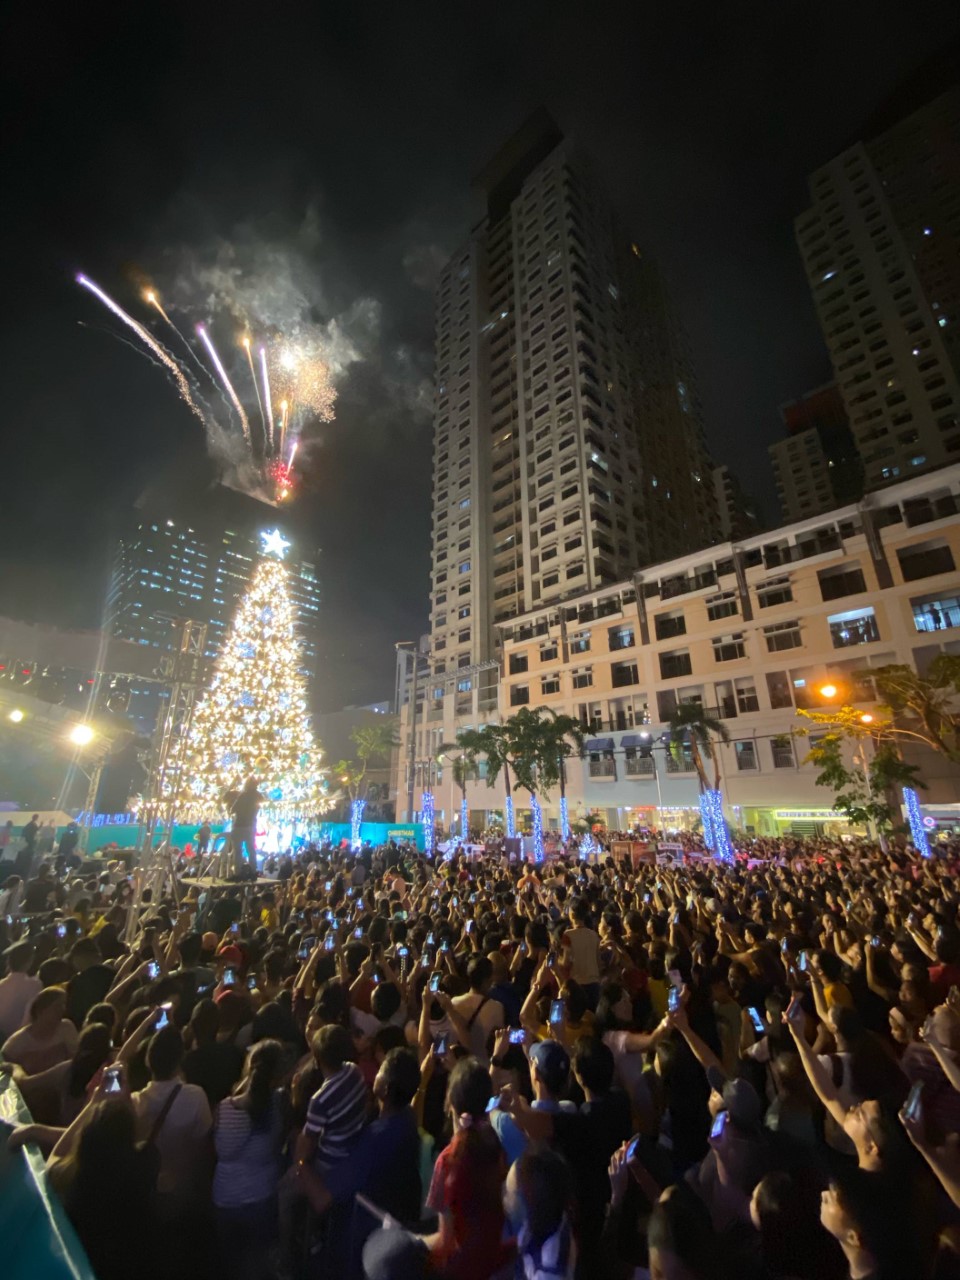 Araneta City lights up Christmas with Anne Curtis, other stars; draws crowd of 25,000